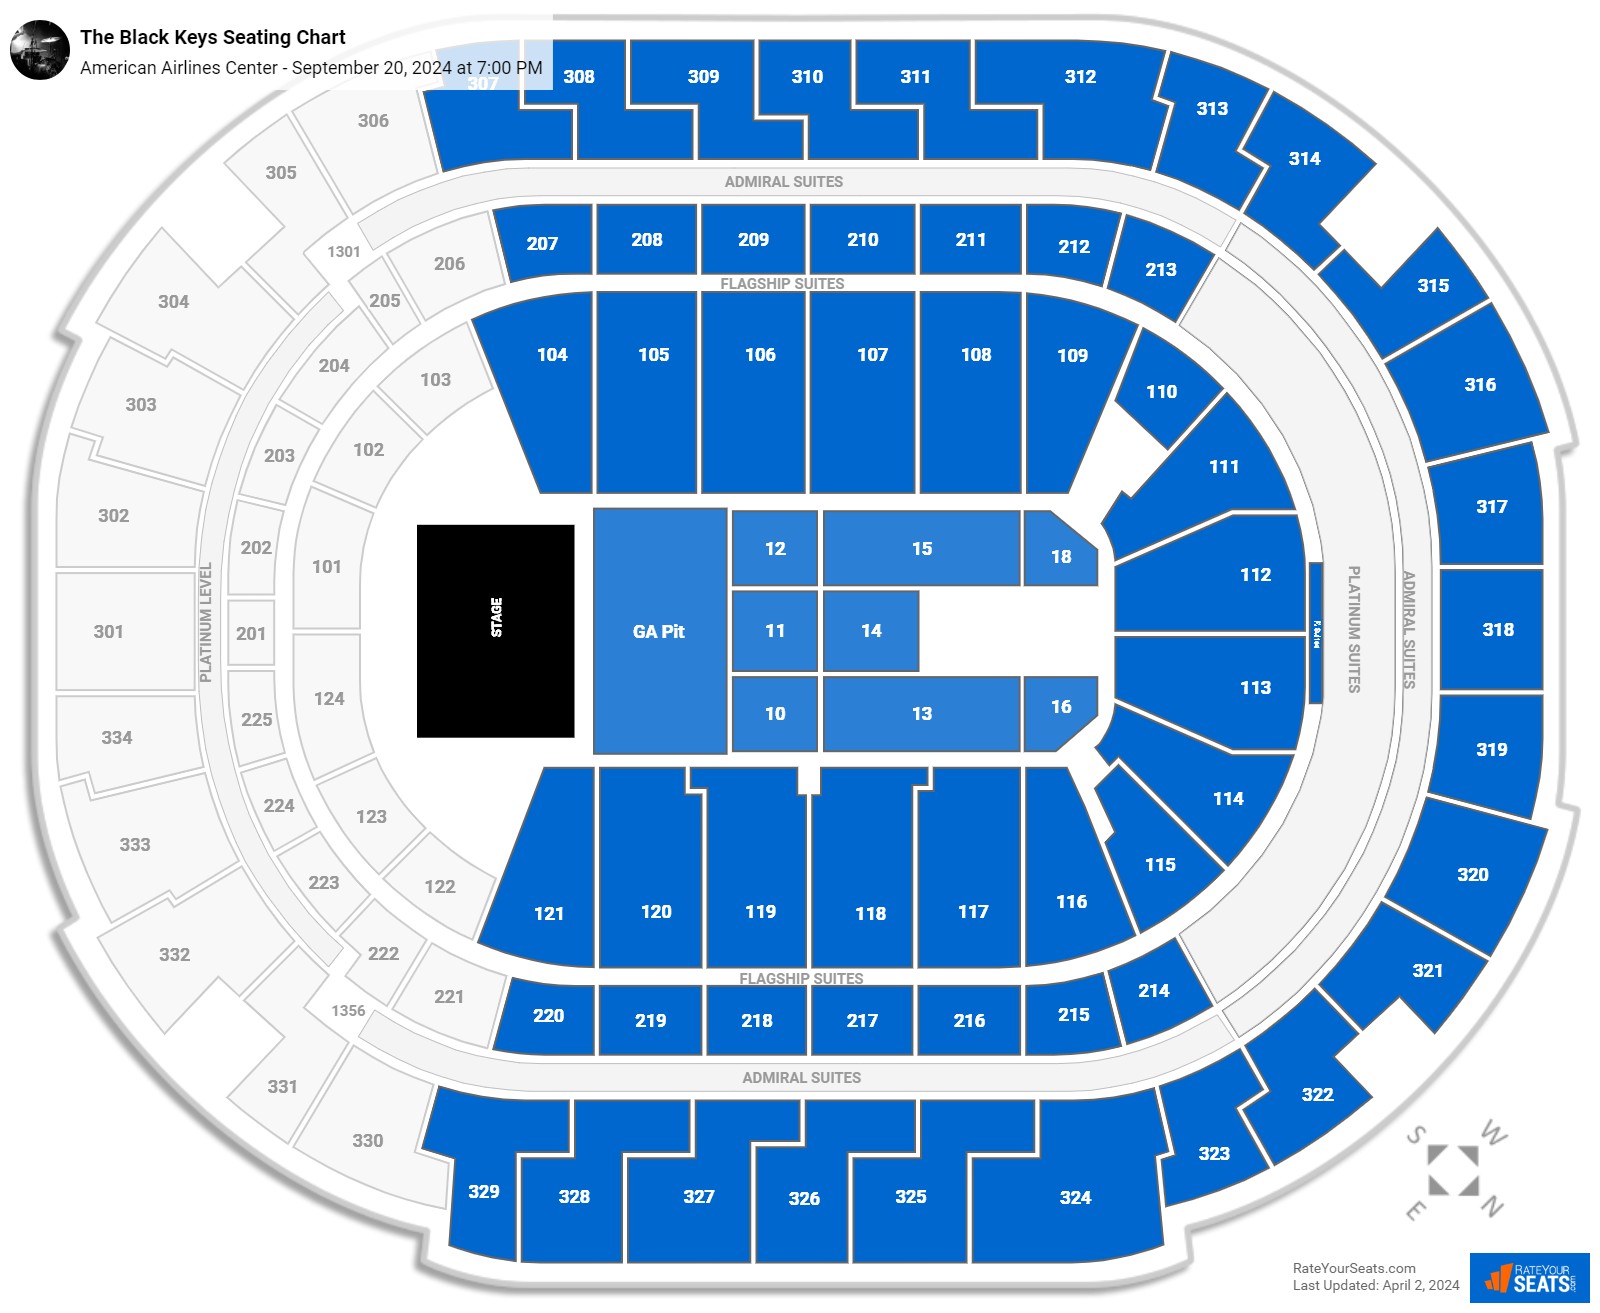 American Airlines Center Concert Seating Chart - RateYourSeats.com